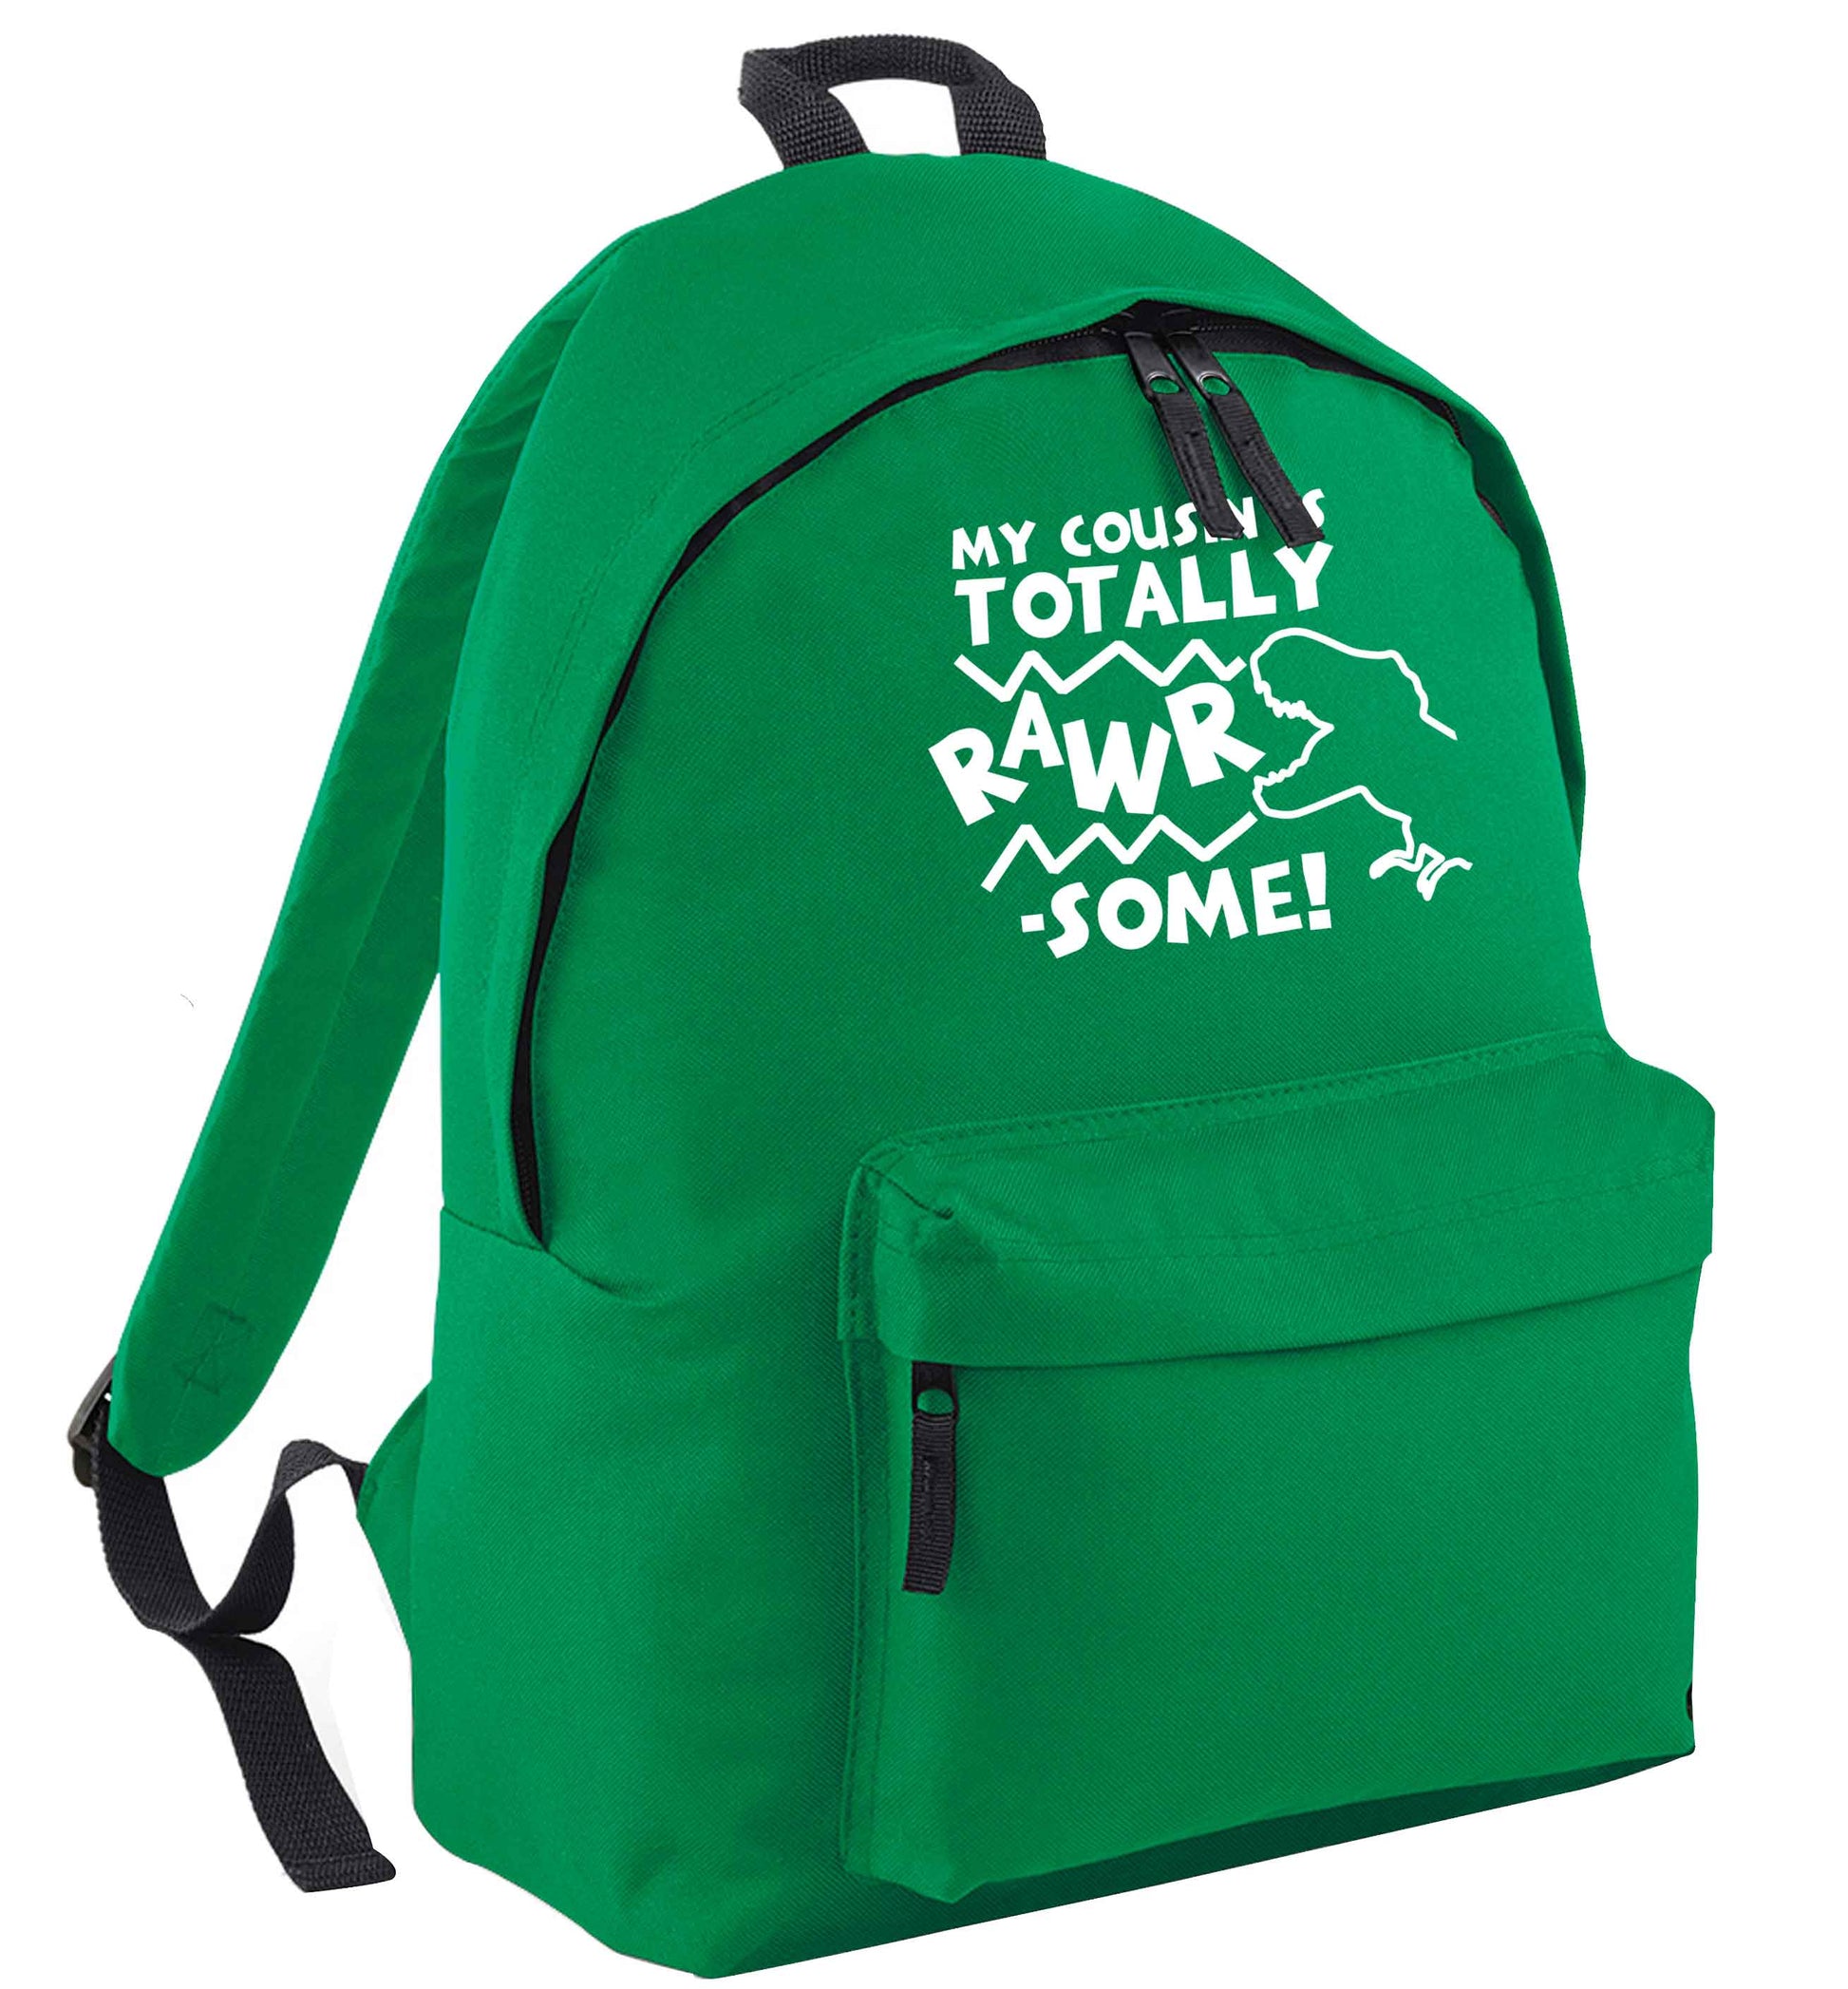 My cousin is totally rawrsome green adults backpack